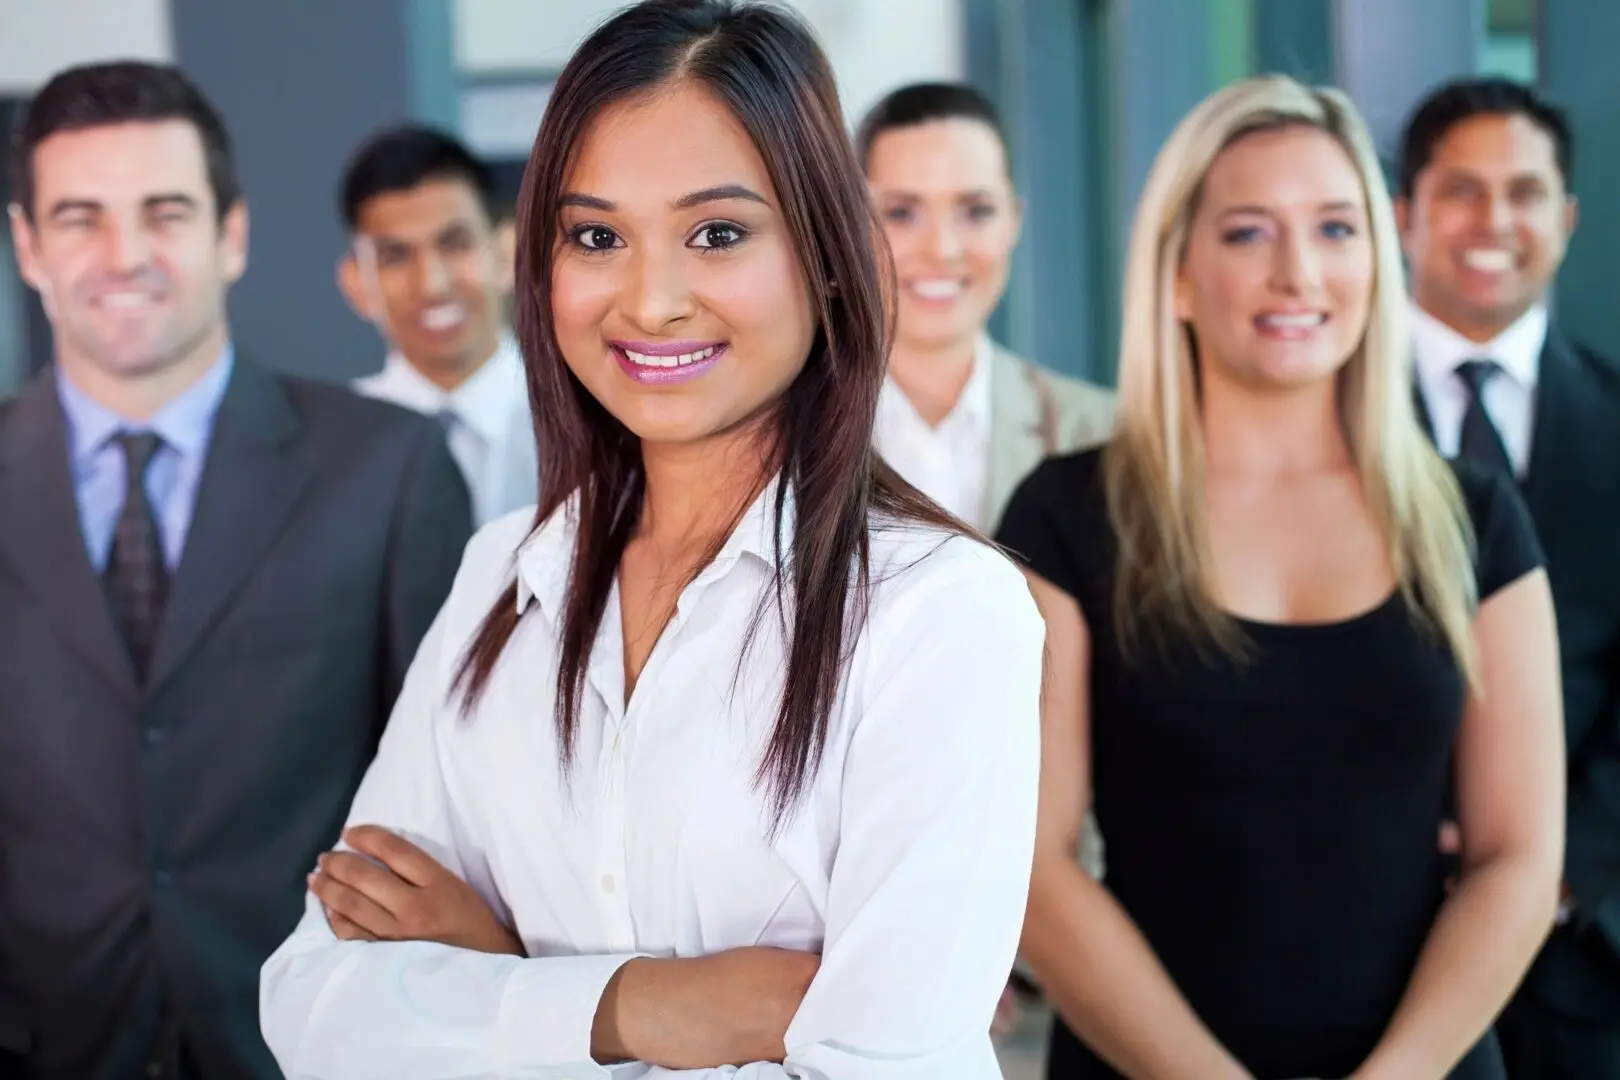 Human Resources Management for your Employees